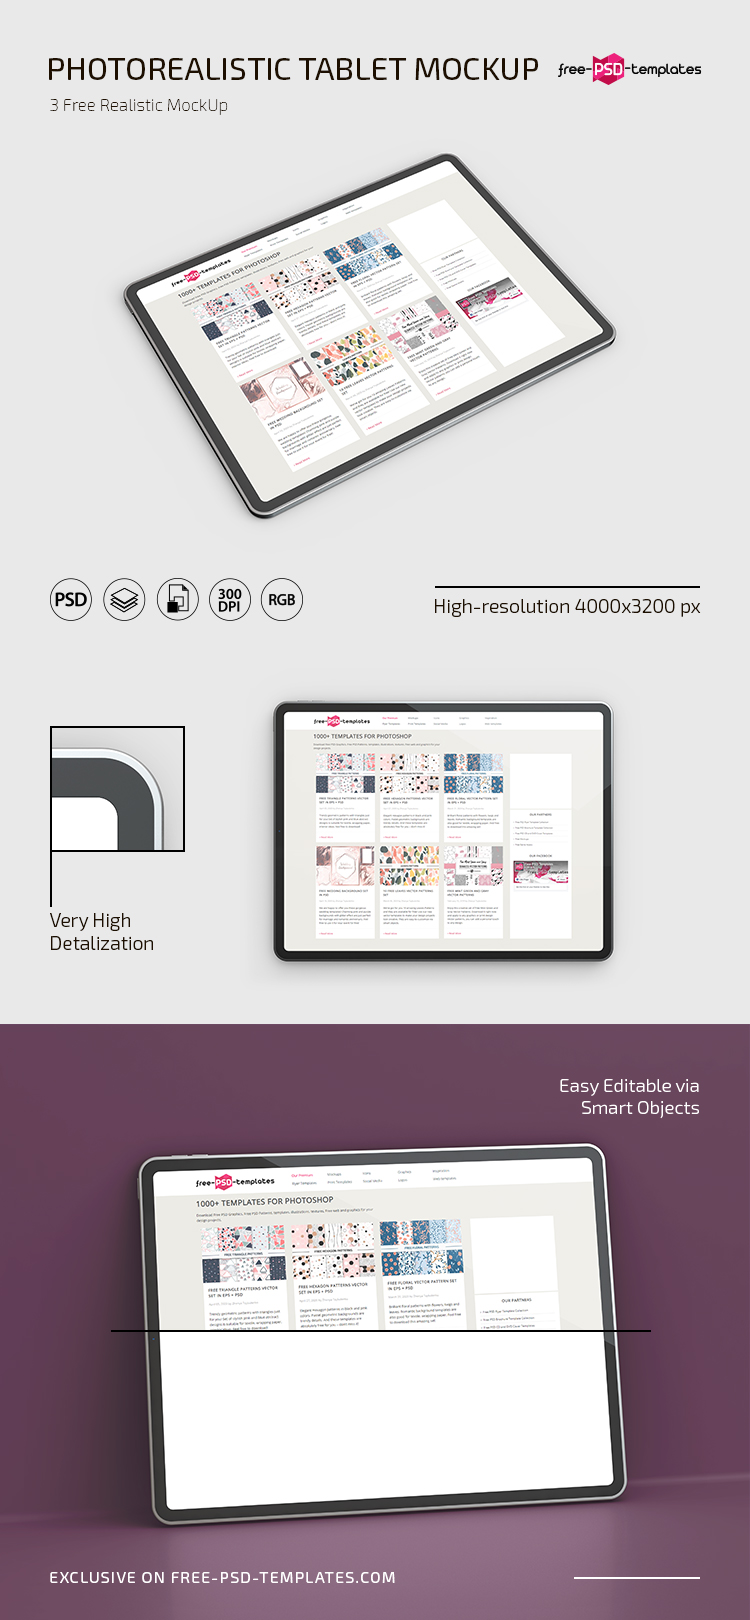 Download Free Psd Photorealistic Tablet Mockup Templates Free Psd Templates